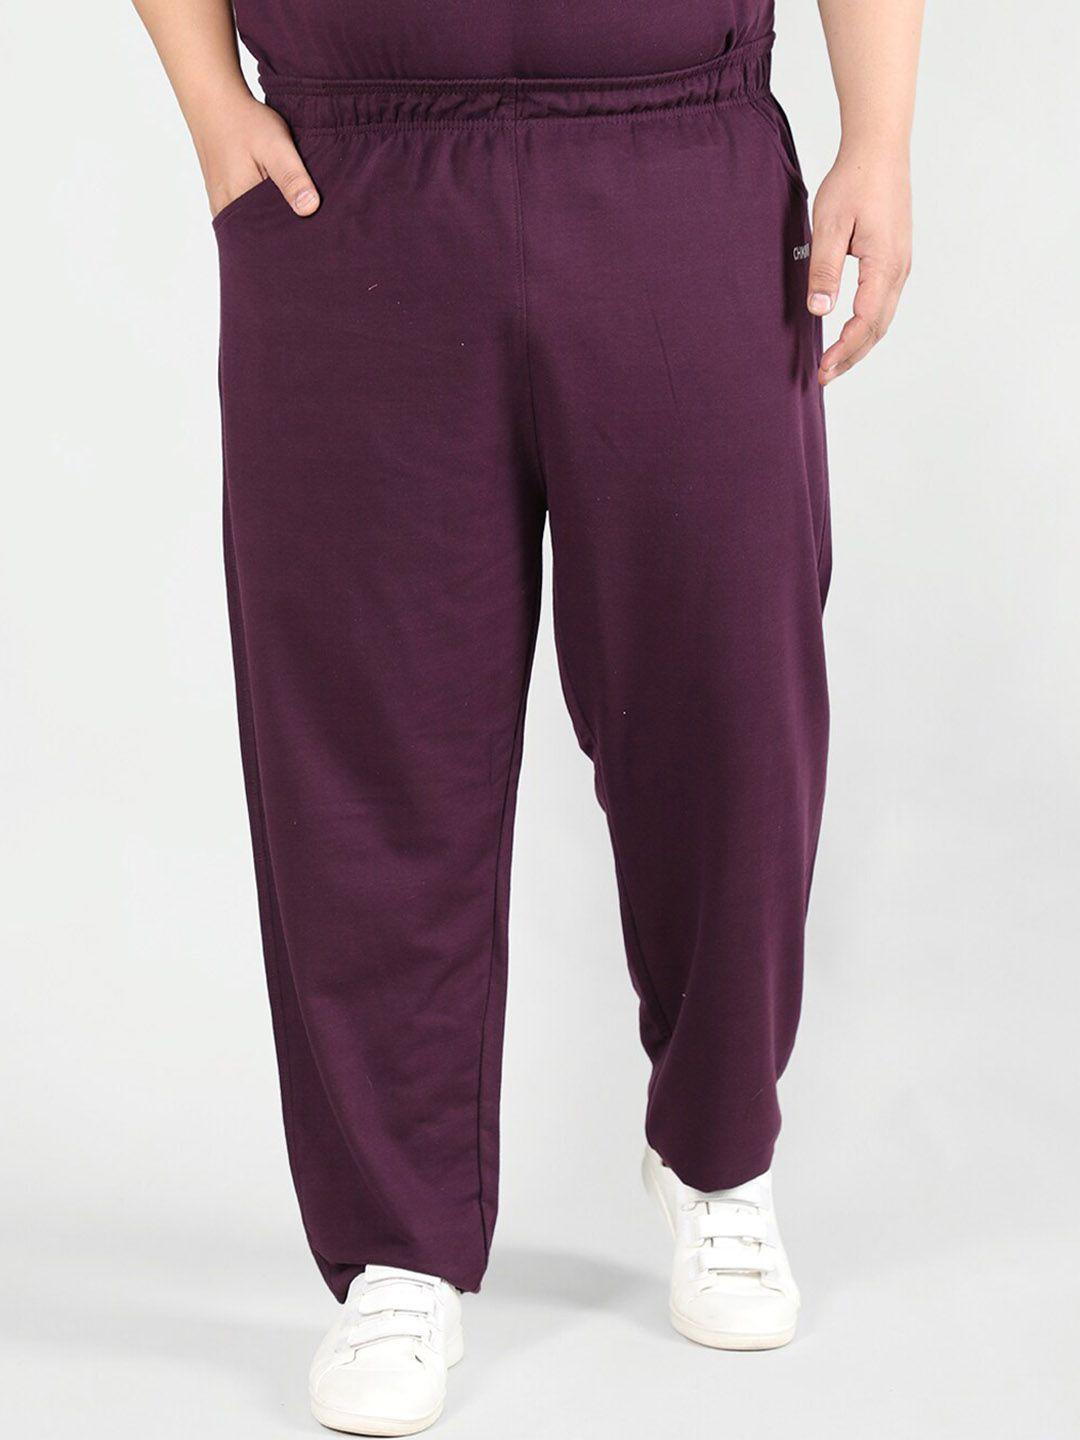 chkokko-men-plus-size-relaxed-fit-track-pants